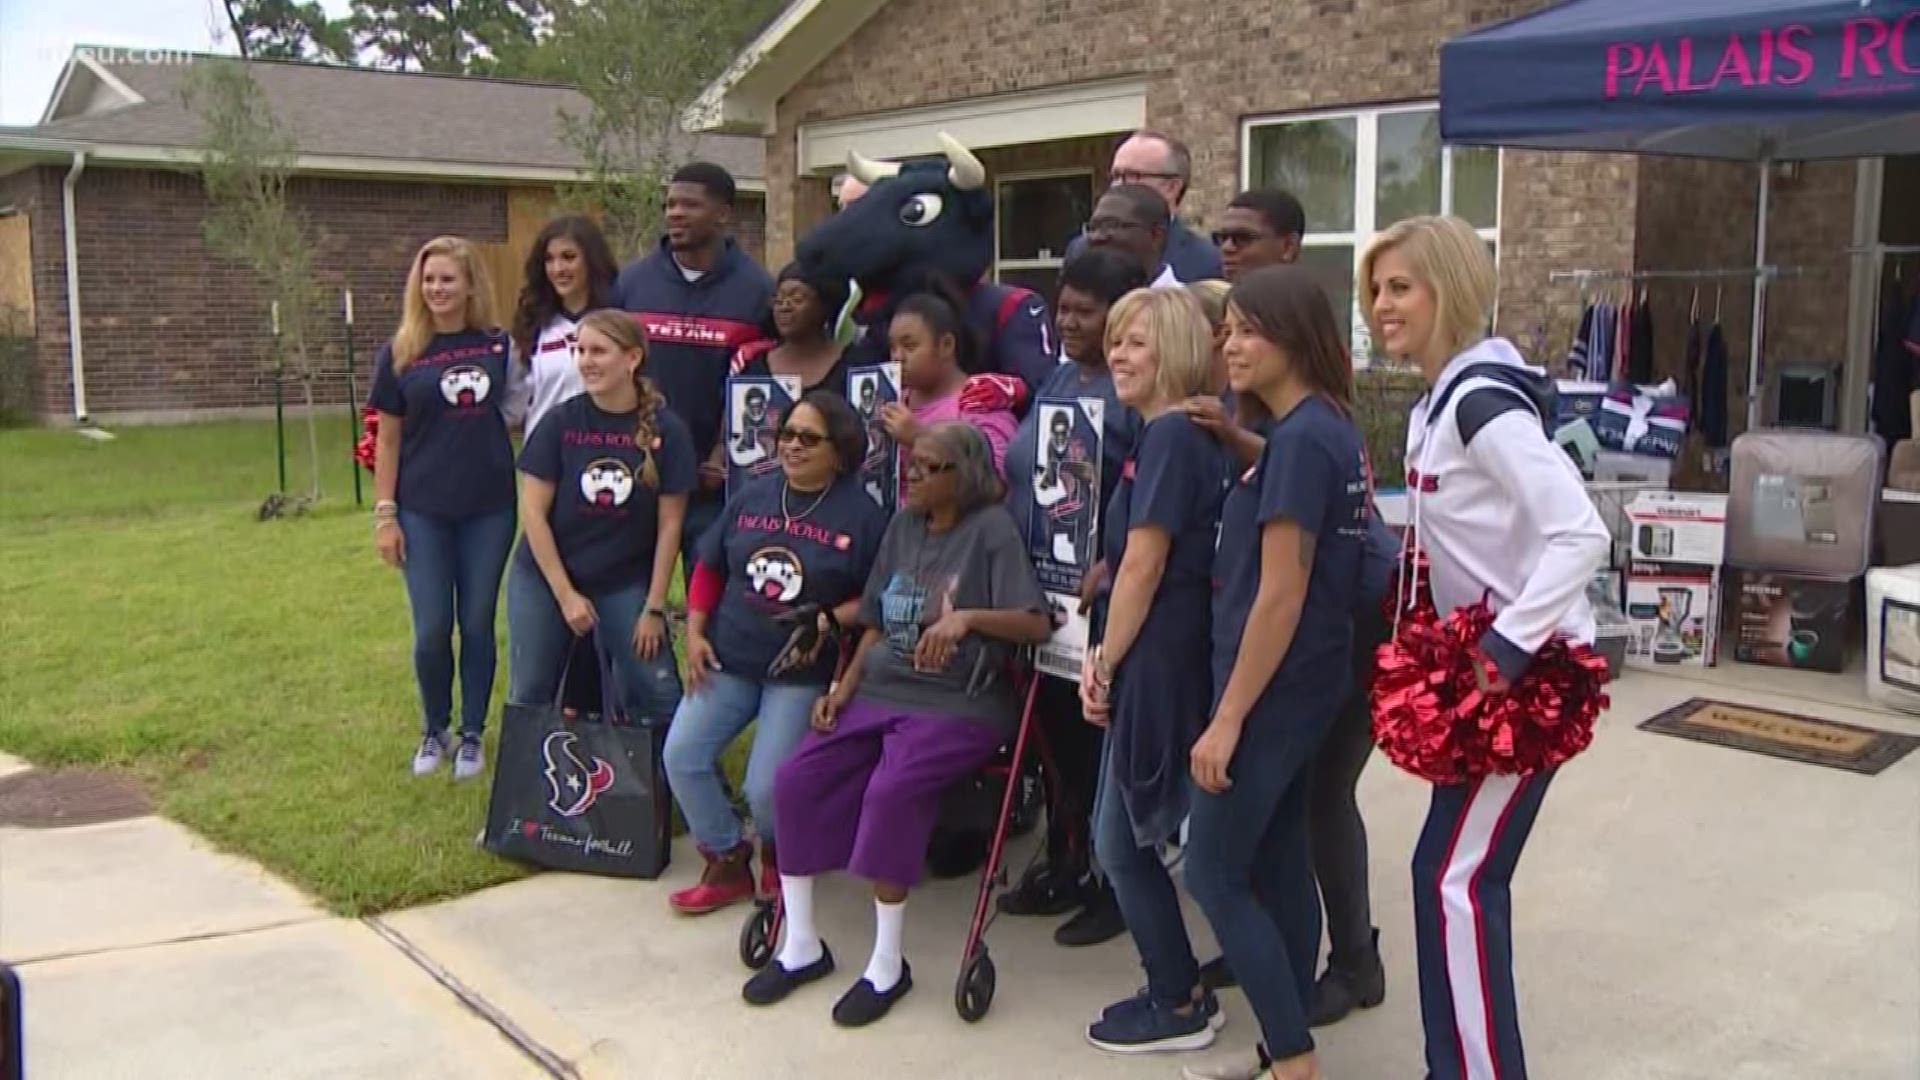 A family of three got a Texas-sized homecoming Wednesday morning when they arrived to their new house. Palais Royal gifted the family with new appliances and tickets to Thursday's Texans game.